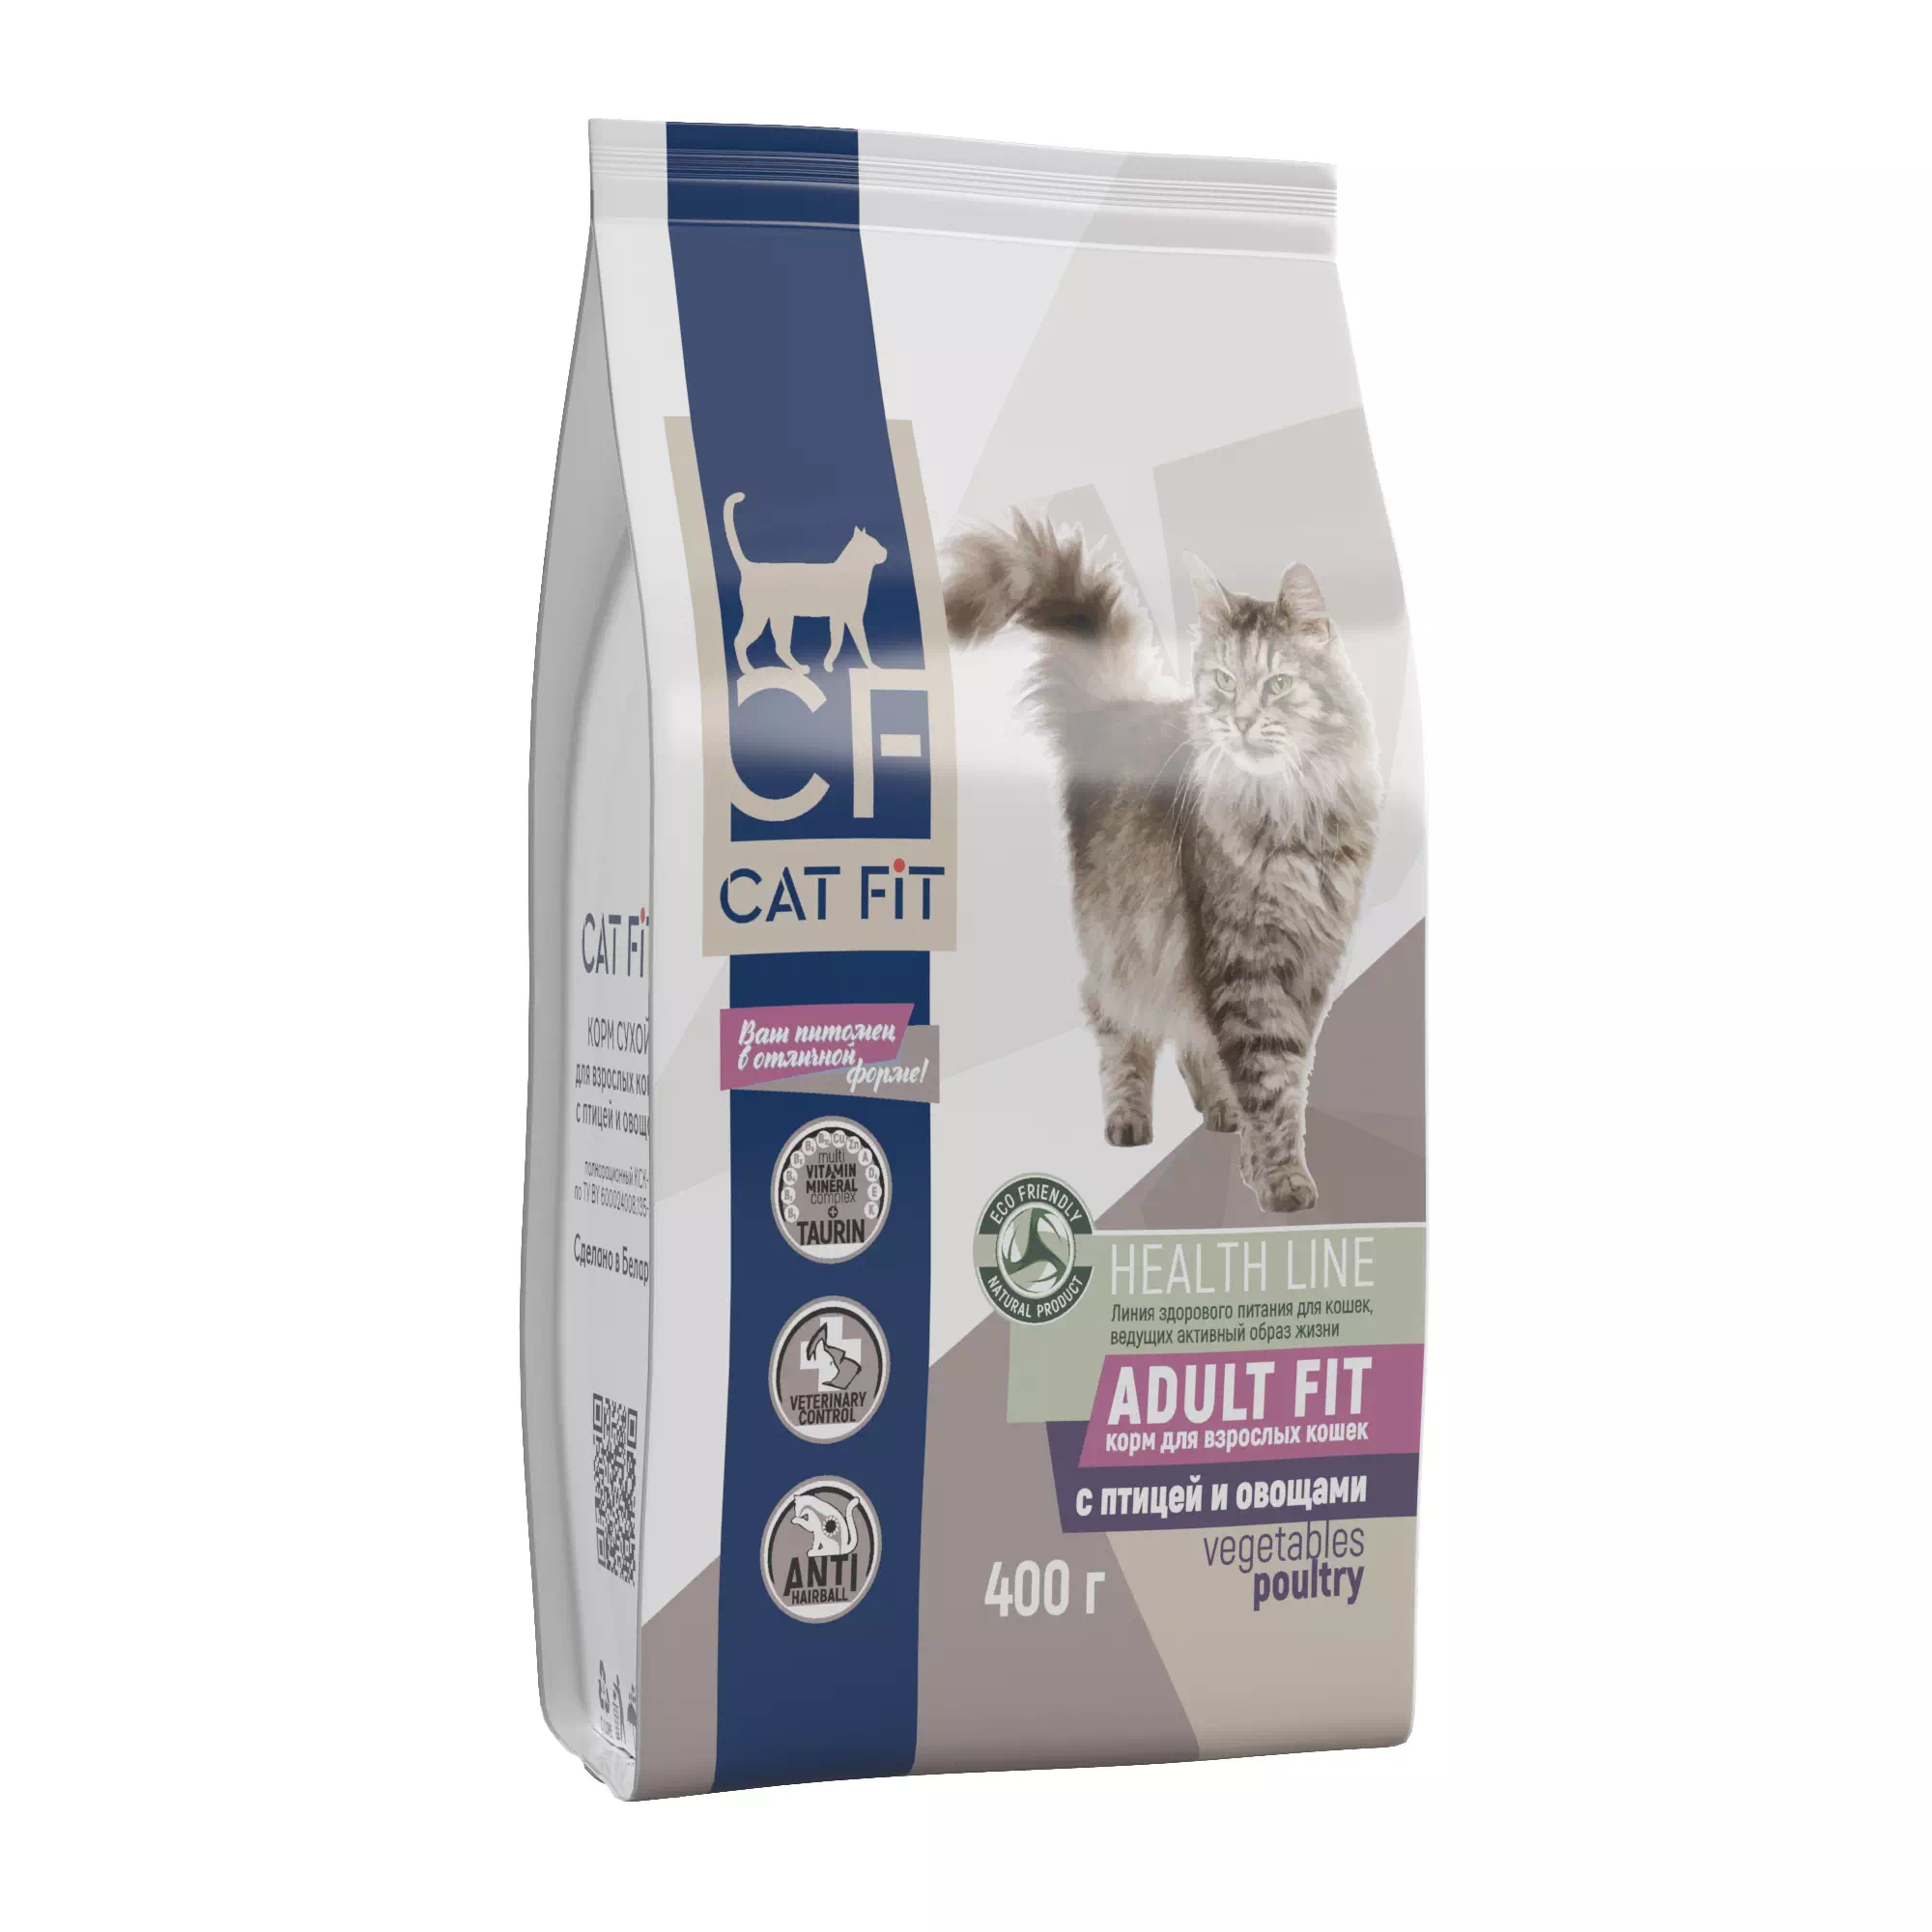 "CAT FIT" dry food for adult cats poultry with vegetables